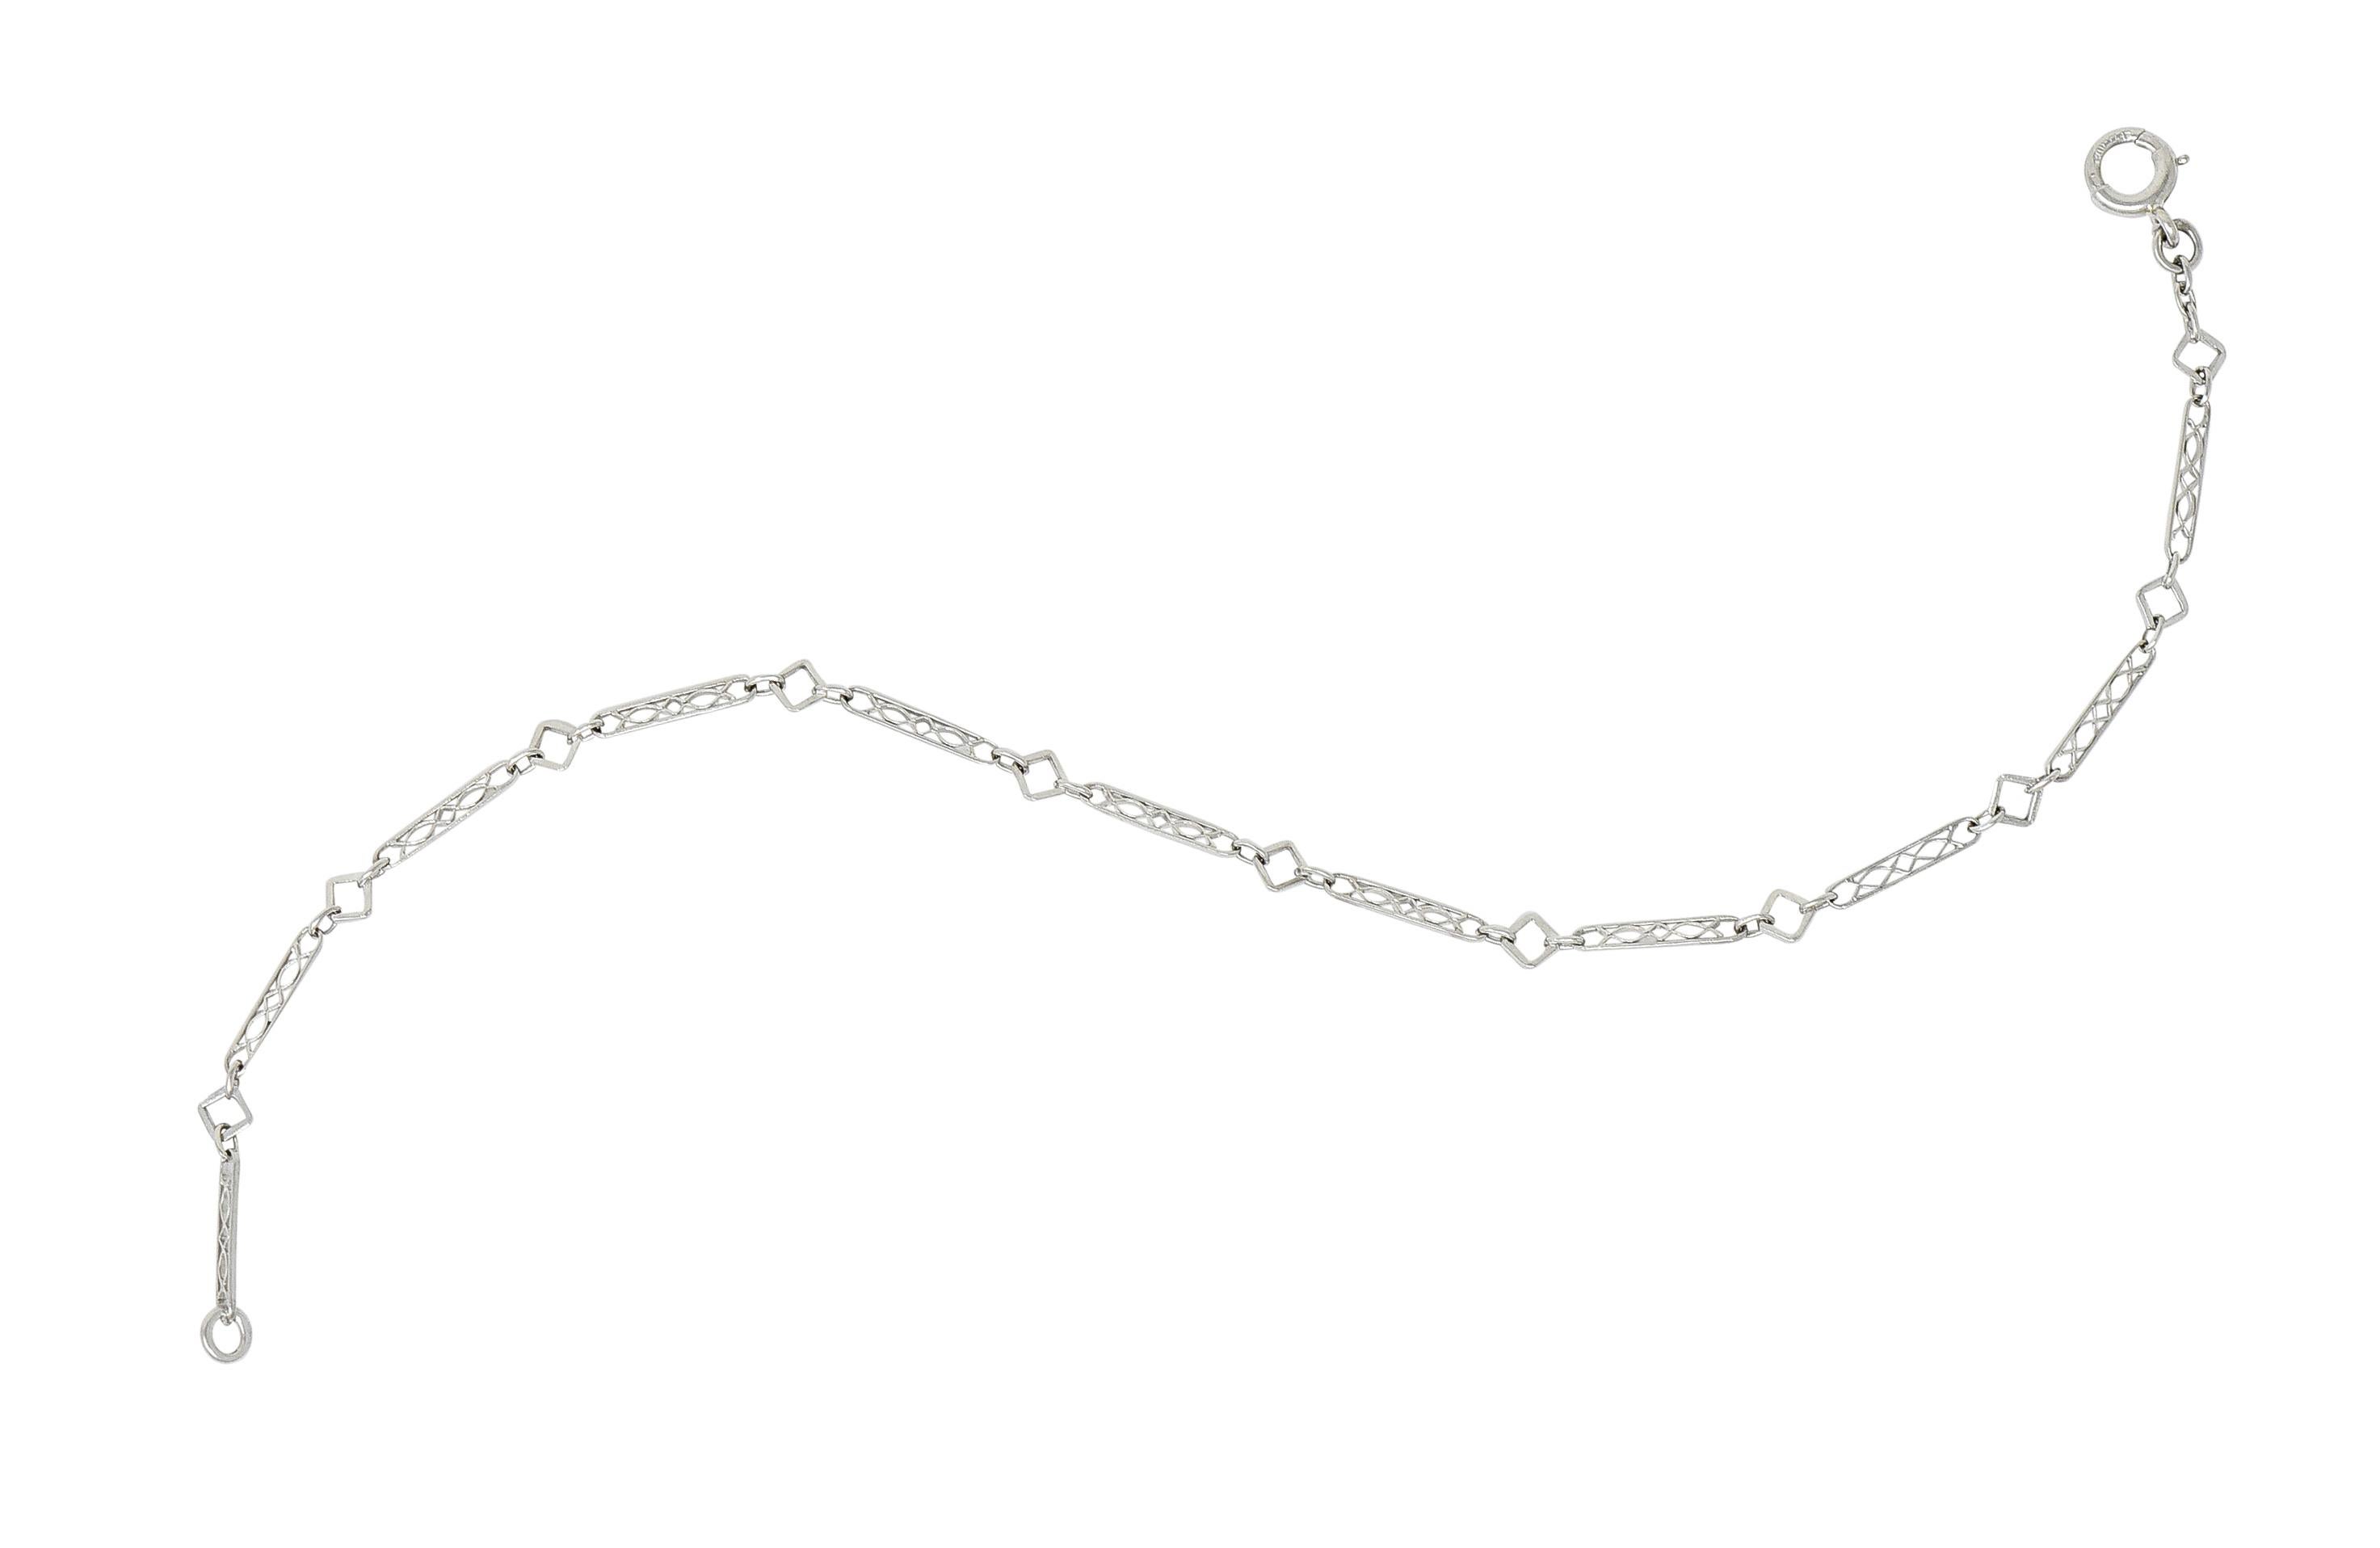 Bracelet designed as bar and link style

Navette shaped links alternate with elongated bars centering a pierced trellis design

Completed by a spring ring clasp

Stamped Irid Plat for platinum-iridium

Circa: 1930s

Length: 7 inches

Width: 3/16